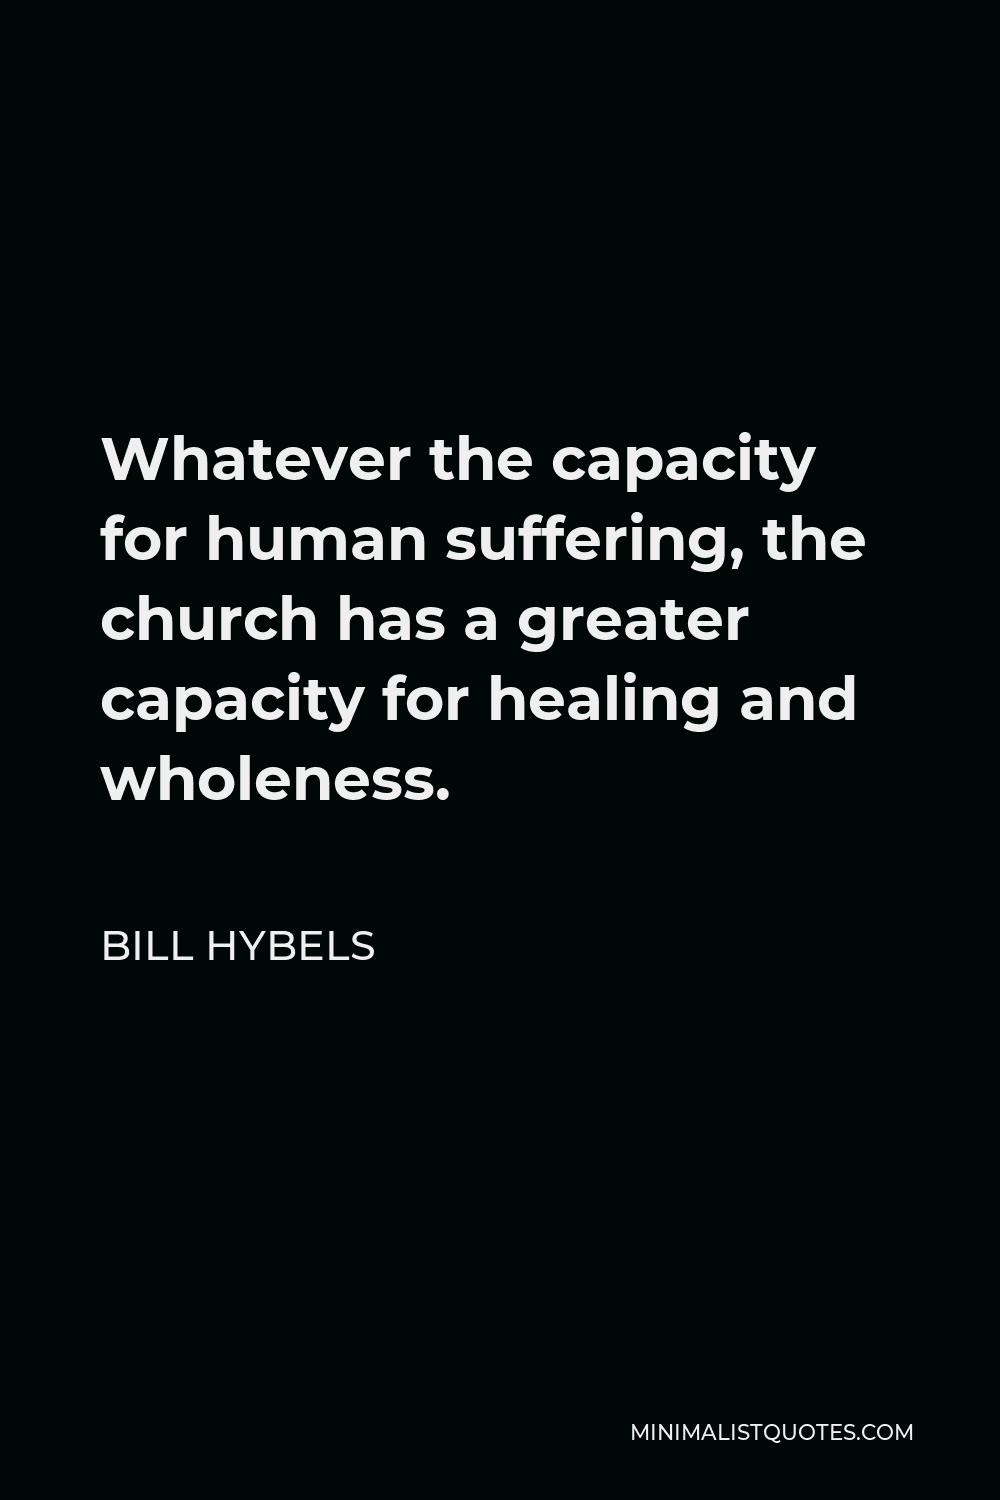 Bill Hybels Quote - Whatever the capacity for human suffering, the church has a greater capacity for healing and wholeness.